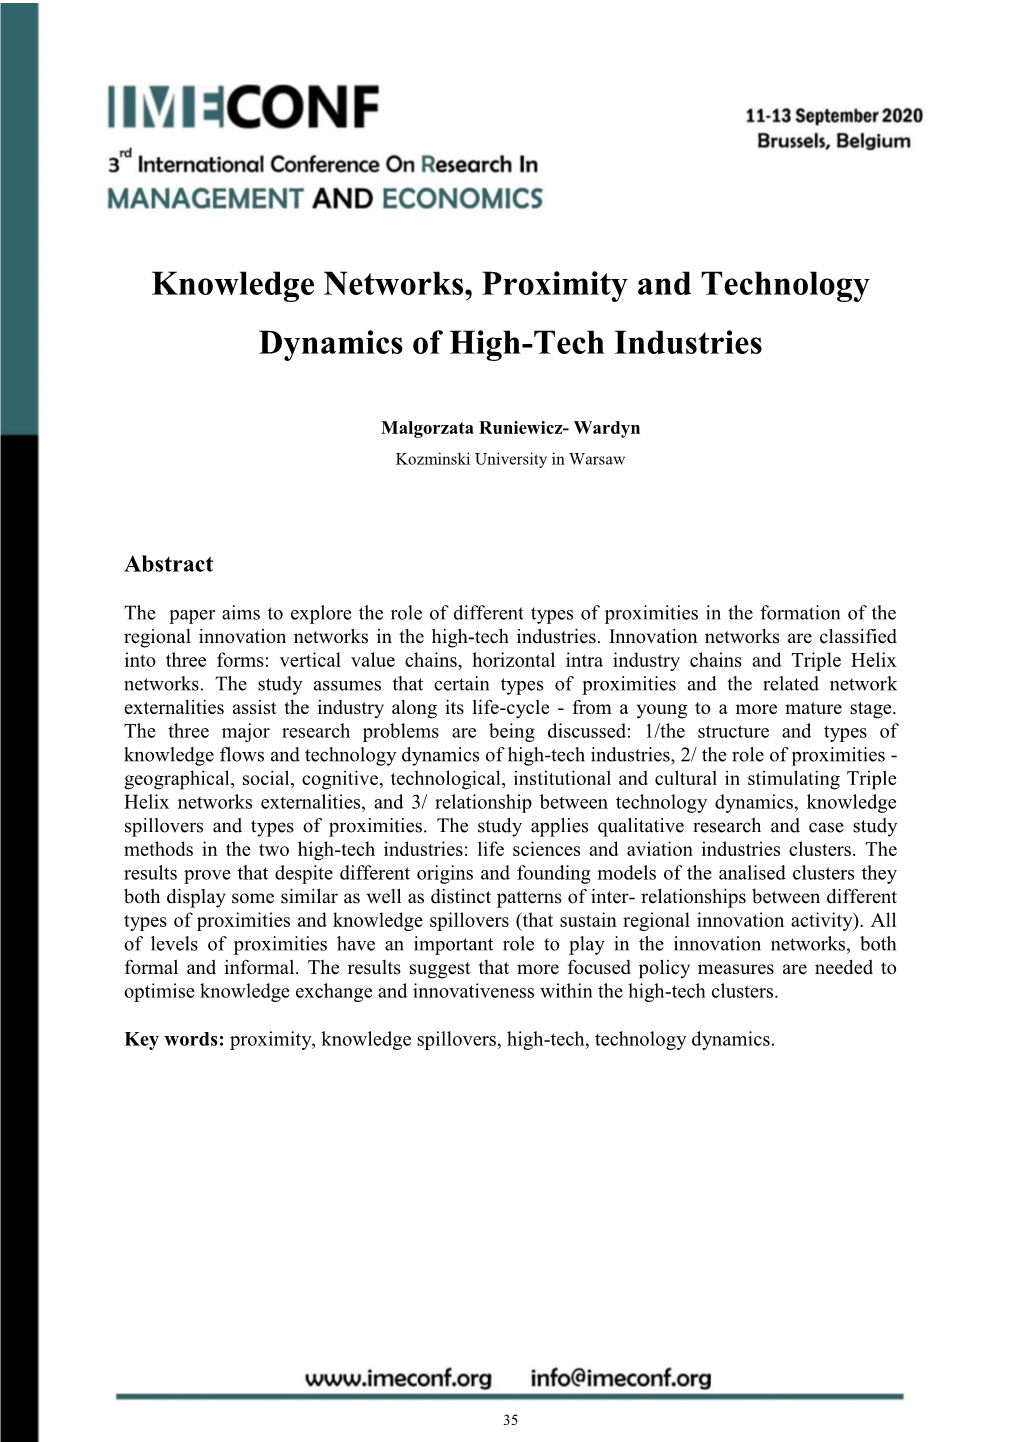 Knowledge Networks, Proximity and Technology Dynamics of High-Tech Industries